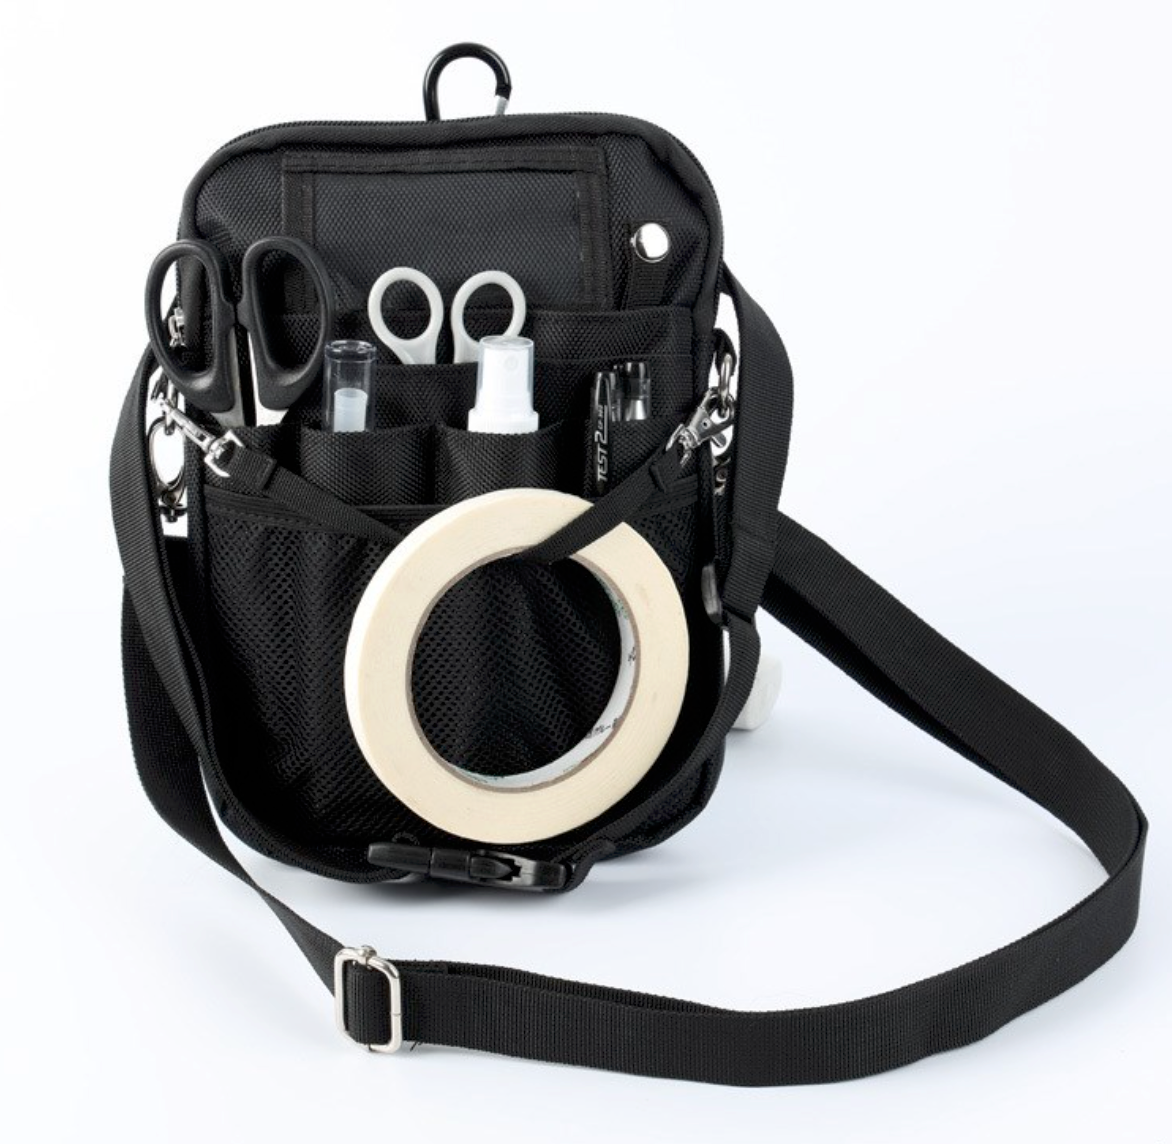 ALPAKA Access Pouch Sling Bag For Earpods, Cables, Coins, Cables -  DriveBikes